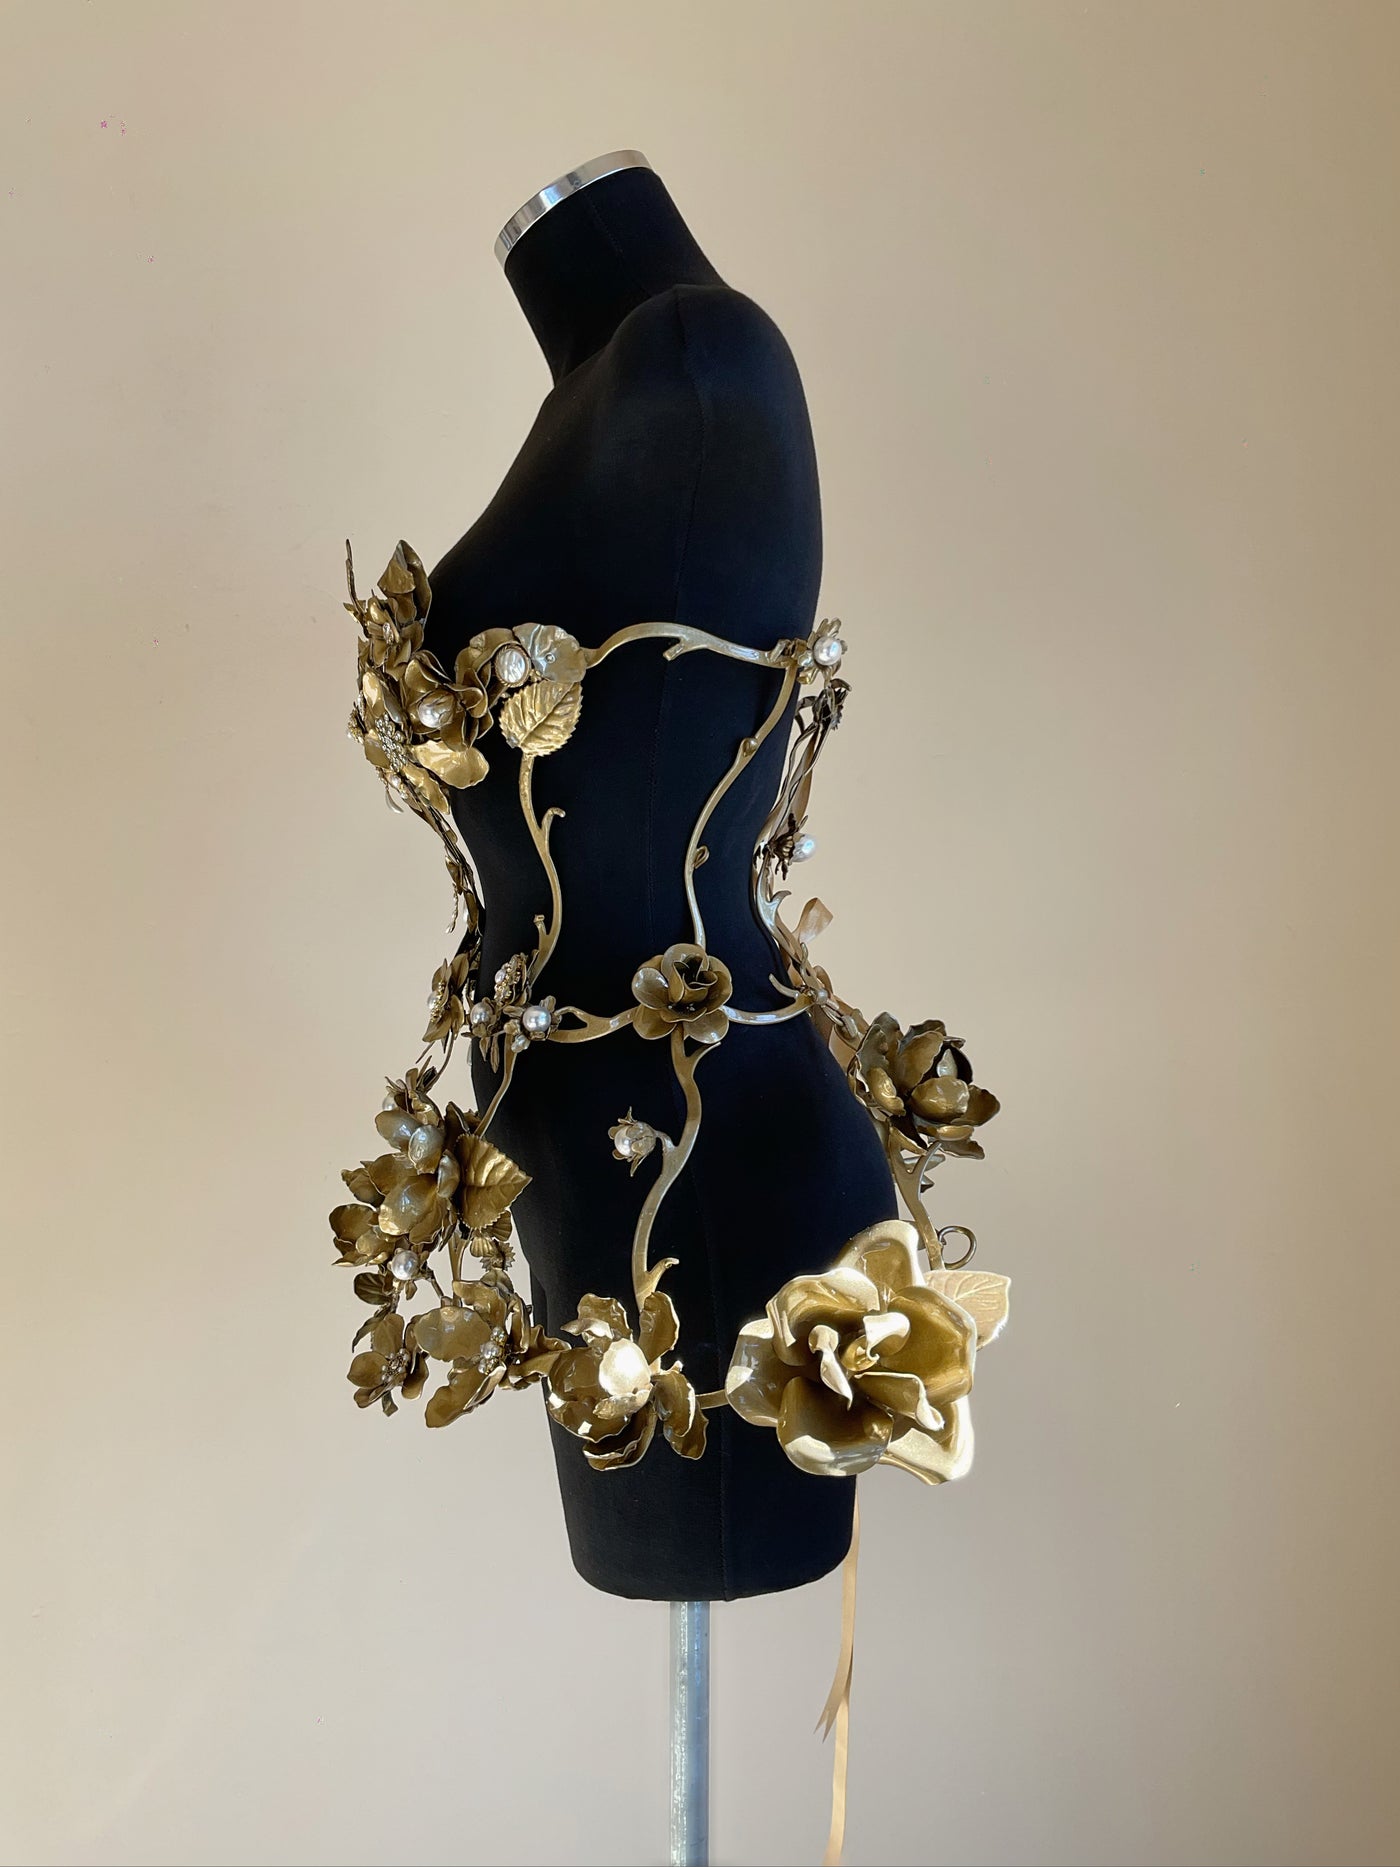 ROYAL GILDED GARDEN CORSET and matching crown